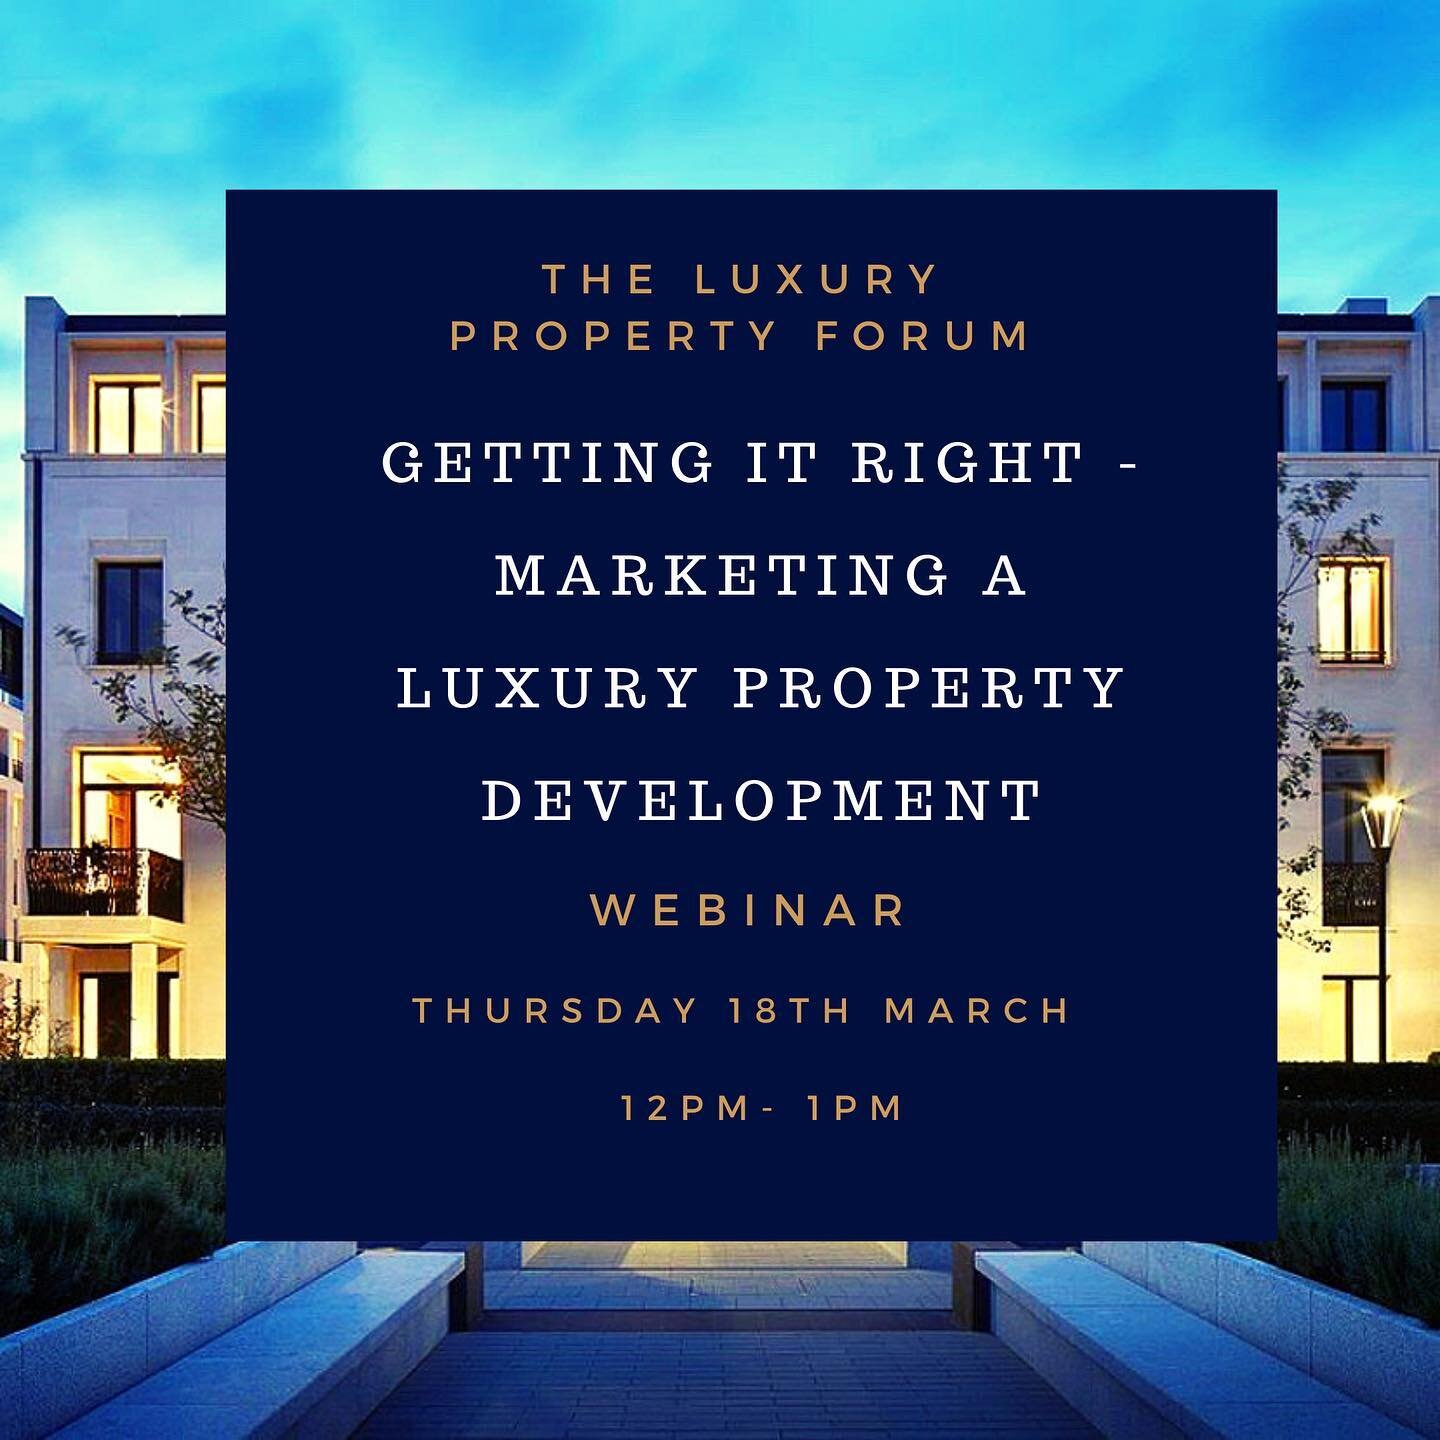 LPF WEBINAR THIS THURSDAY: Getting it Right: Marketing a Luxury Property Development taking place this Thursday 18 March 2021 at 12pm - register via the link in our bio. 

The UK luxury property industry has brought us some of the most ambitious, opu